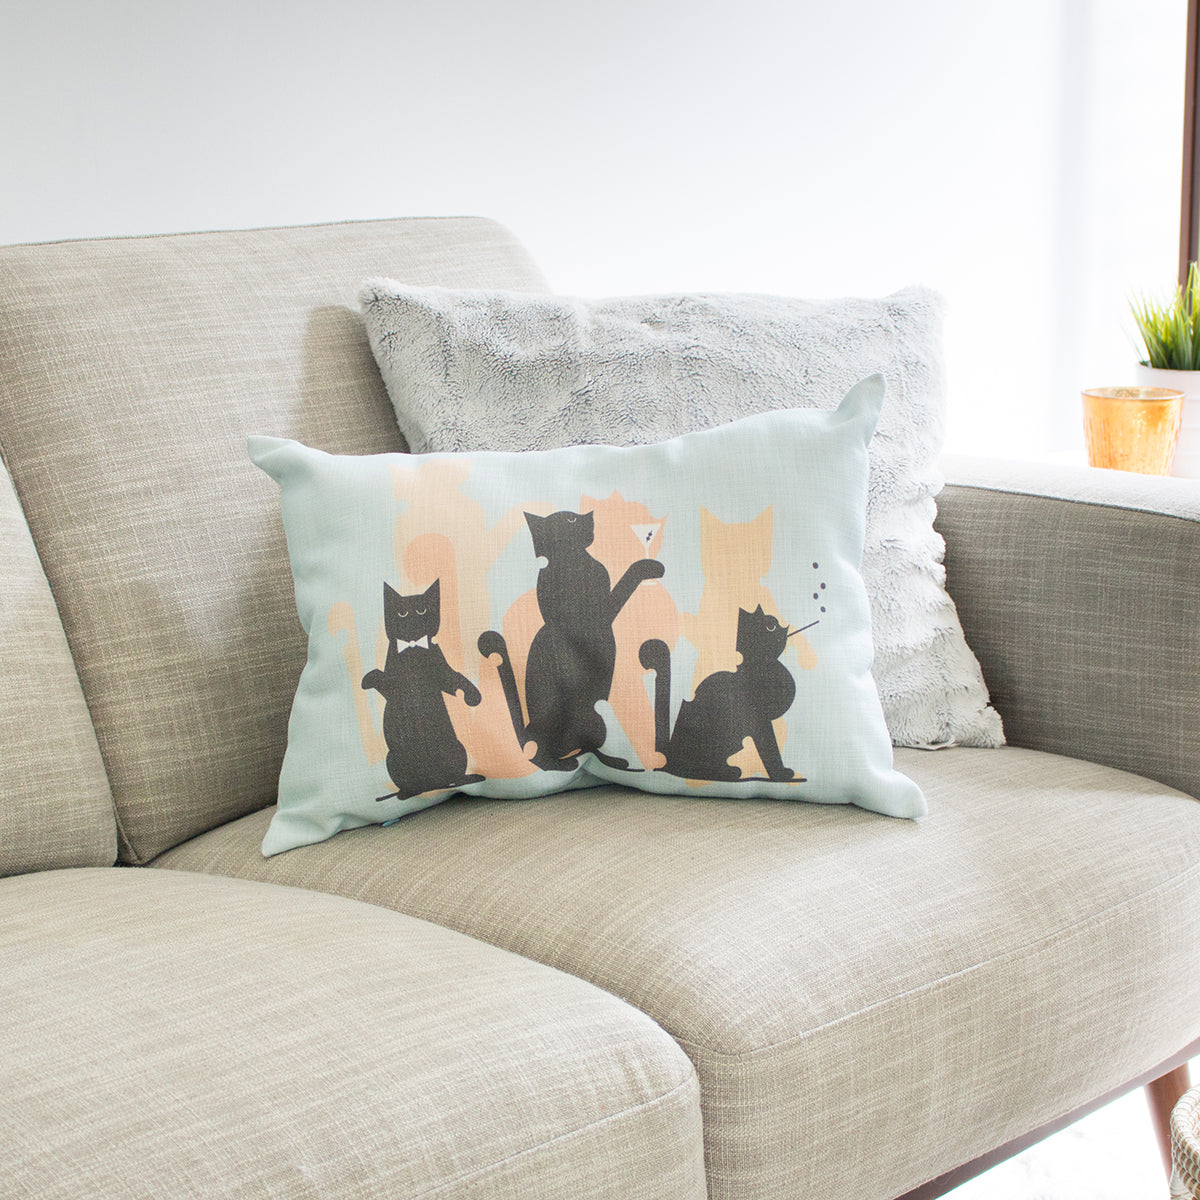 Jazz Cats Pillow Cover - George Brown College